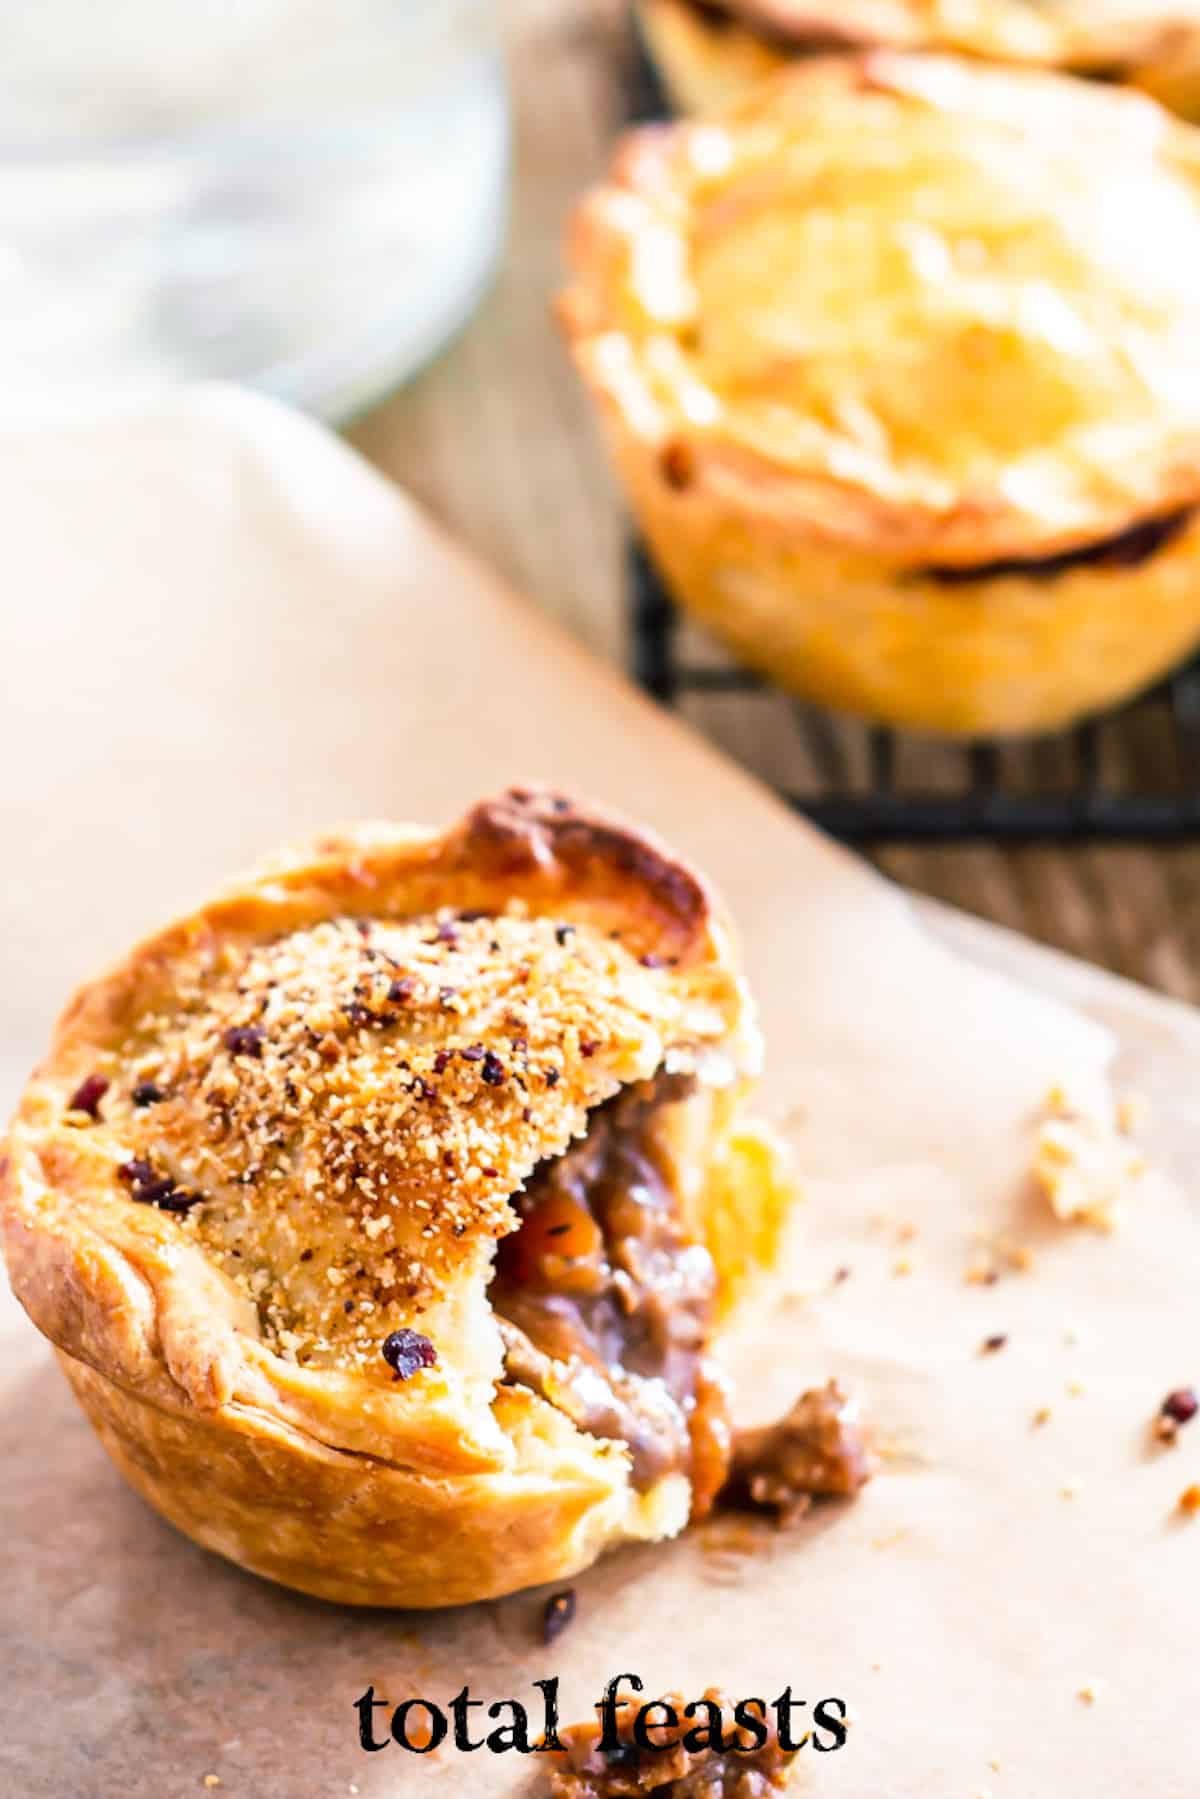 The classic Aussie Meat Pie - Total Feasts